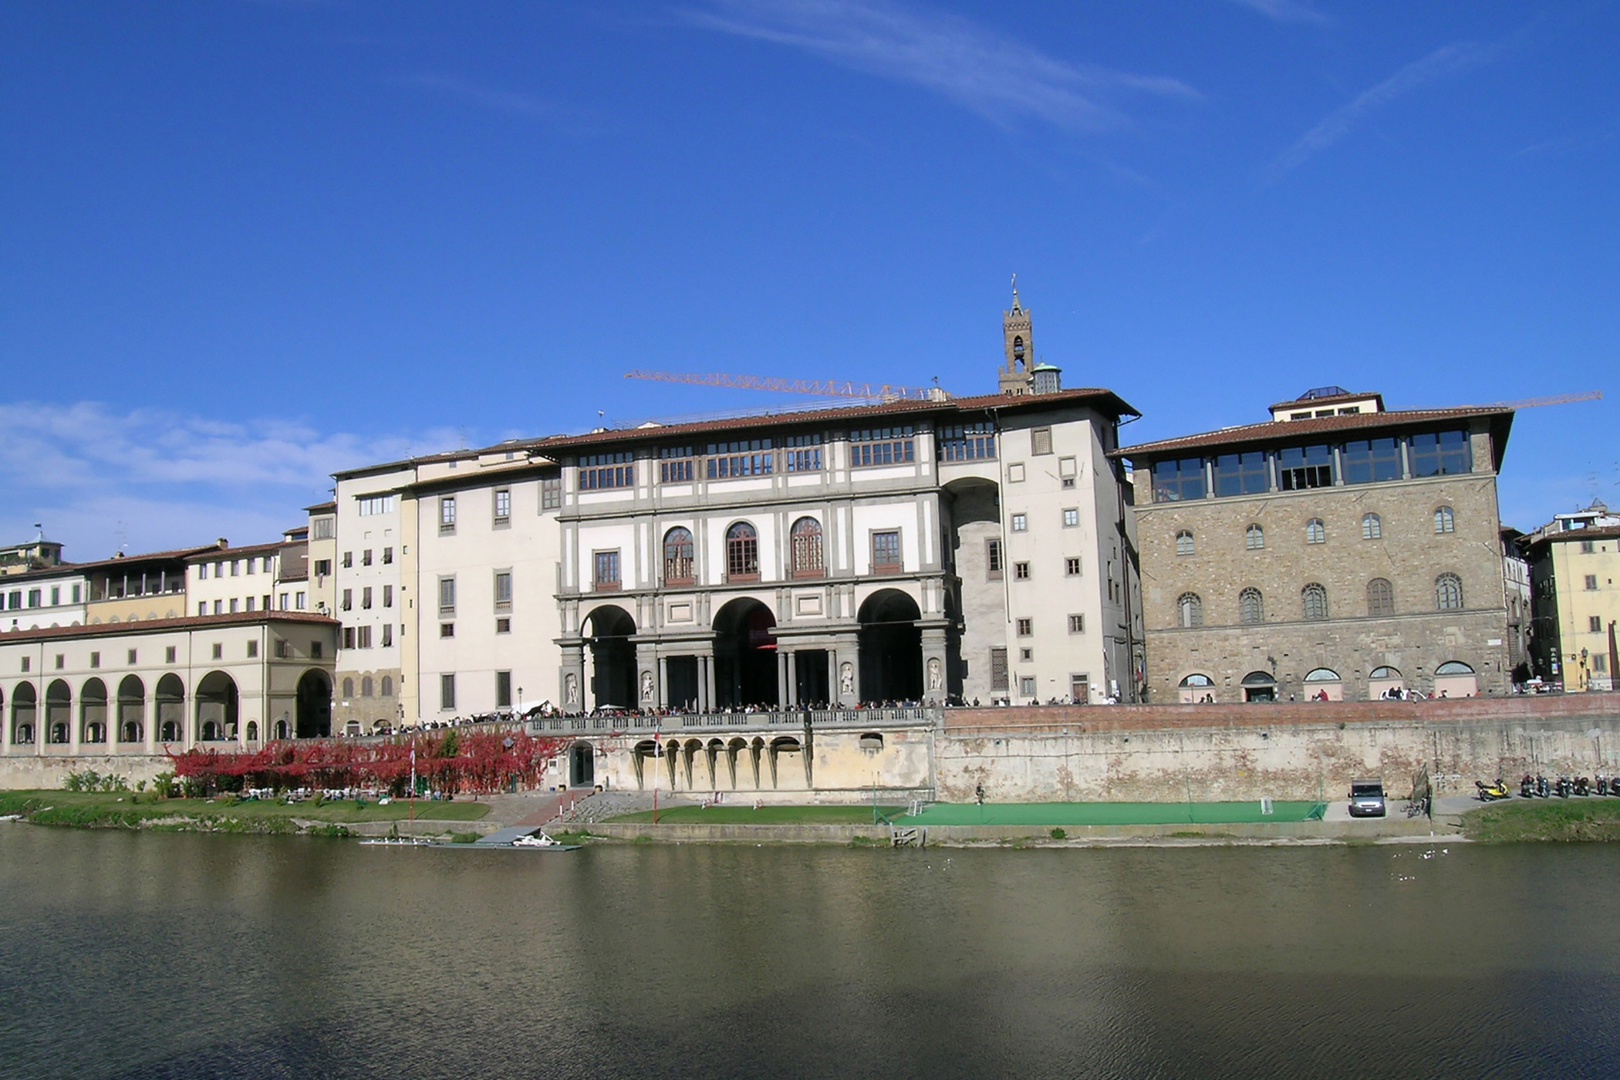 Directly across the Arno river is the famous Uffizi gallery.